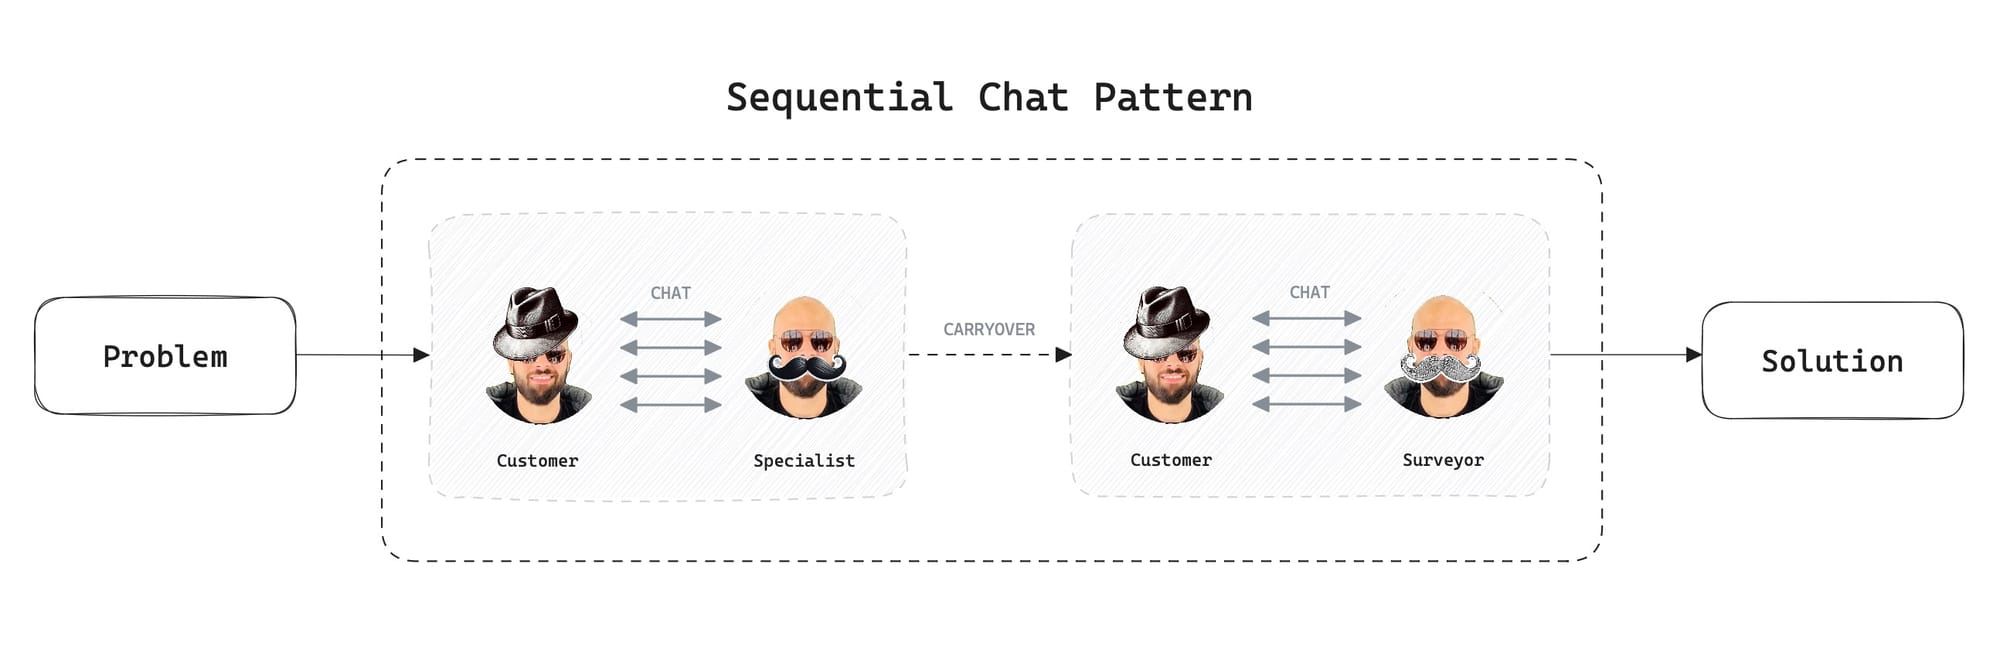 Sequential Chat Pattern in AutoGen - Diagram